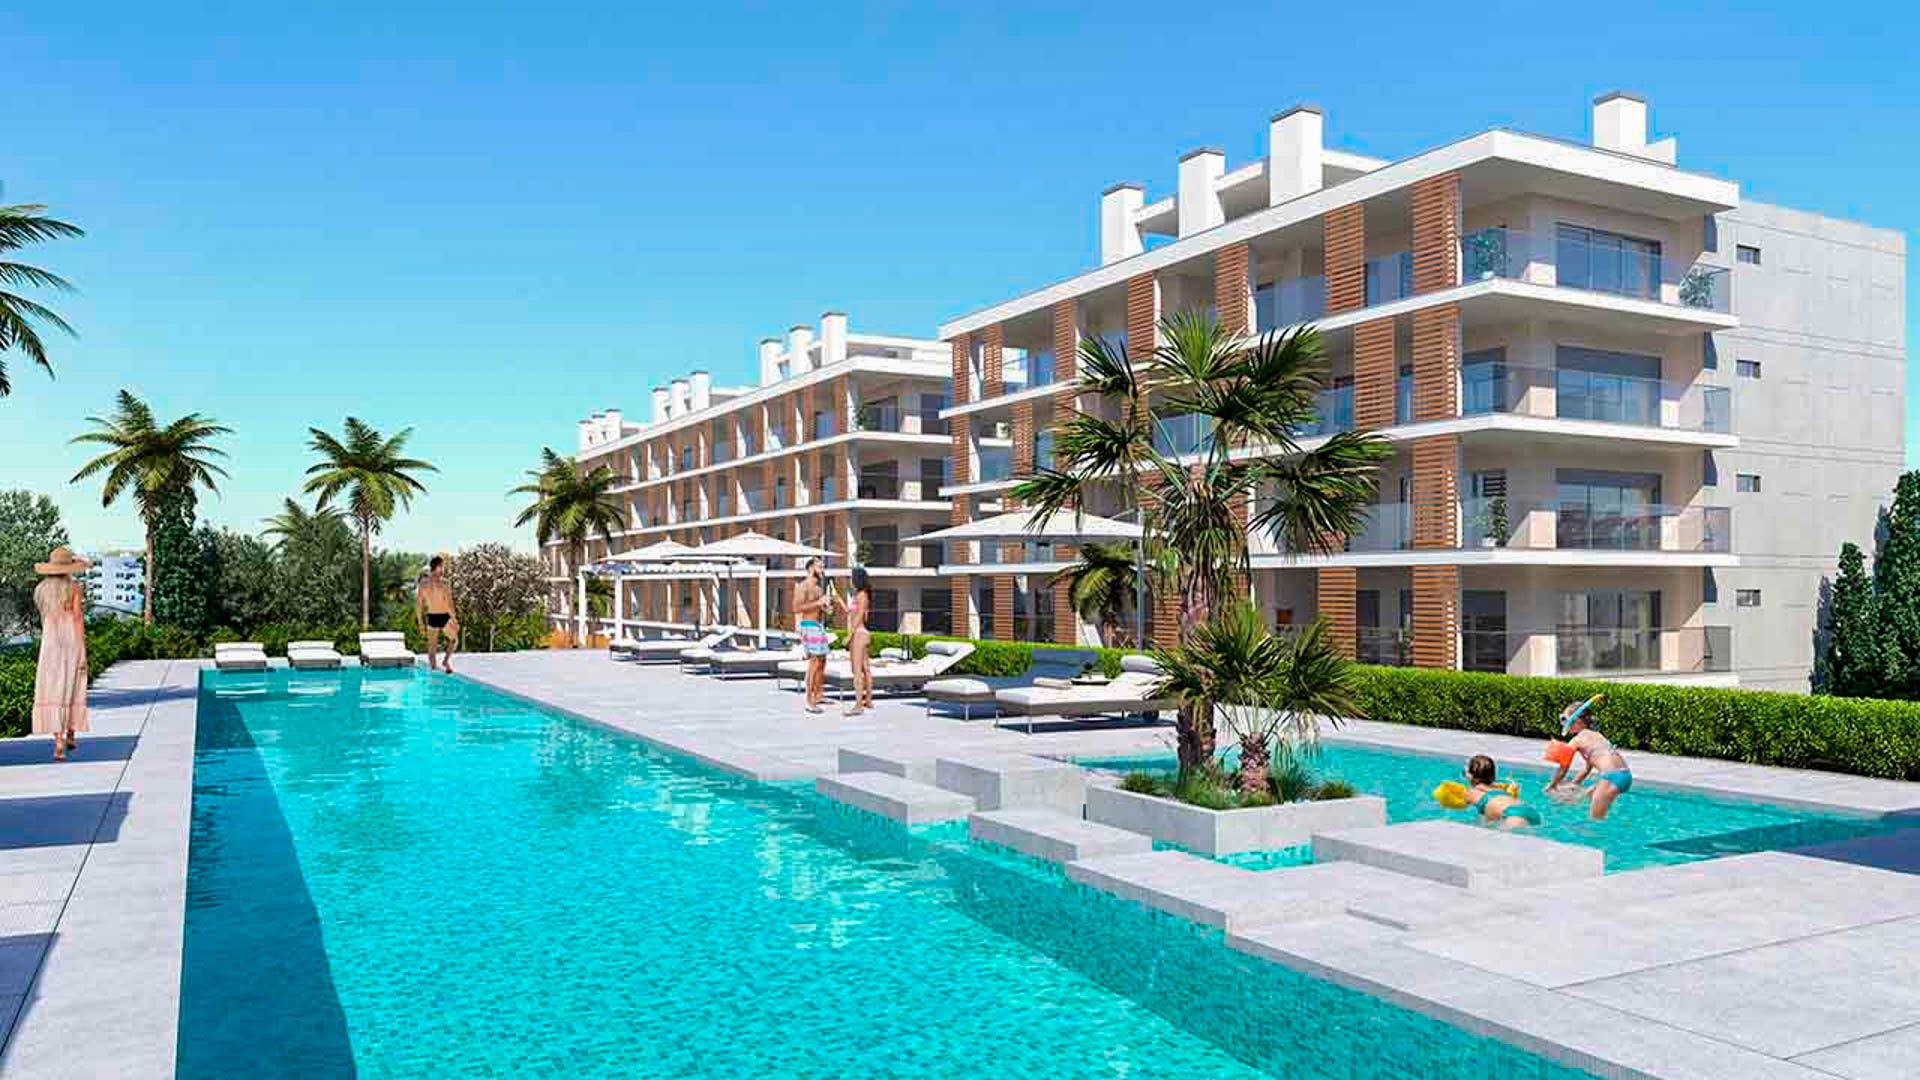 Investment Opportunity - Off Plan 2 Bedroom Apartments, Albufeira | VM1968 Eco-friendly features to minimize environmental impact, these new apartments are perfect for an investment opportunity or holiday home